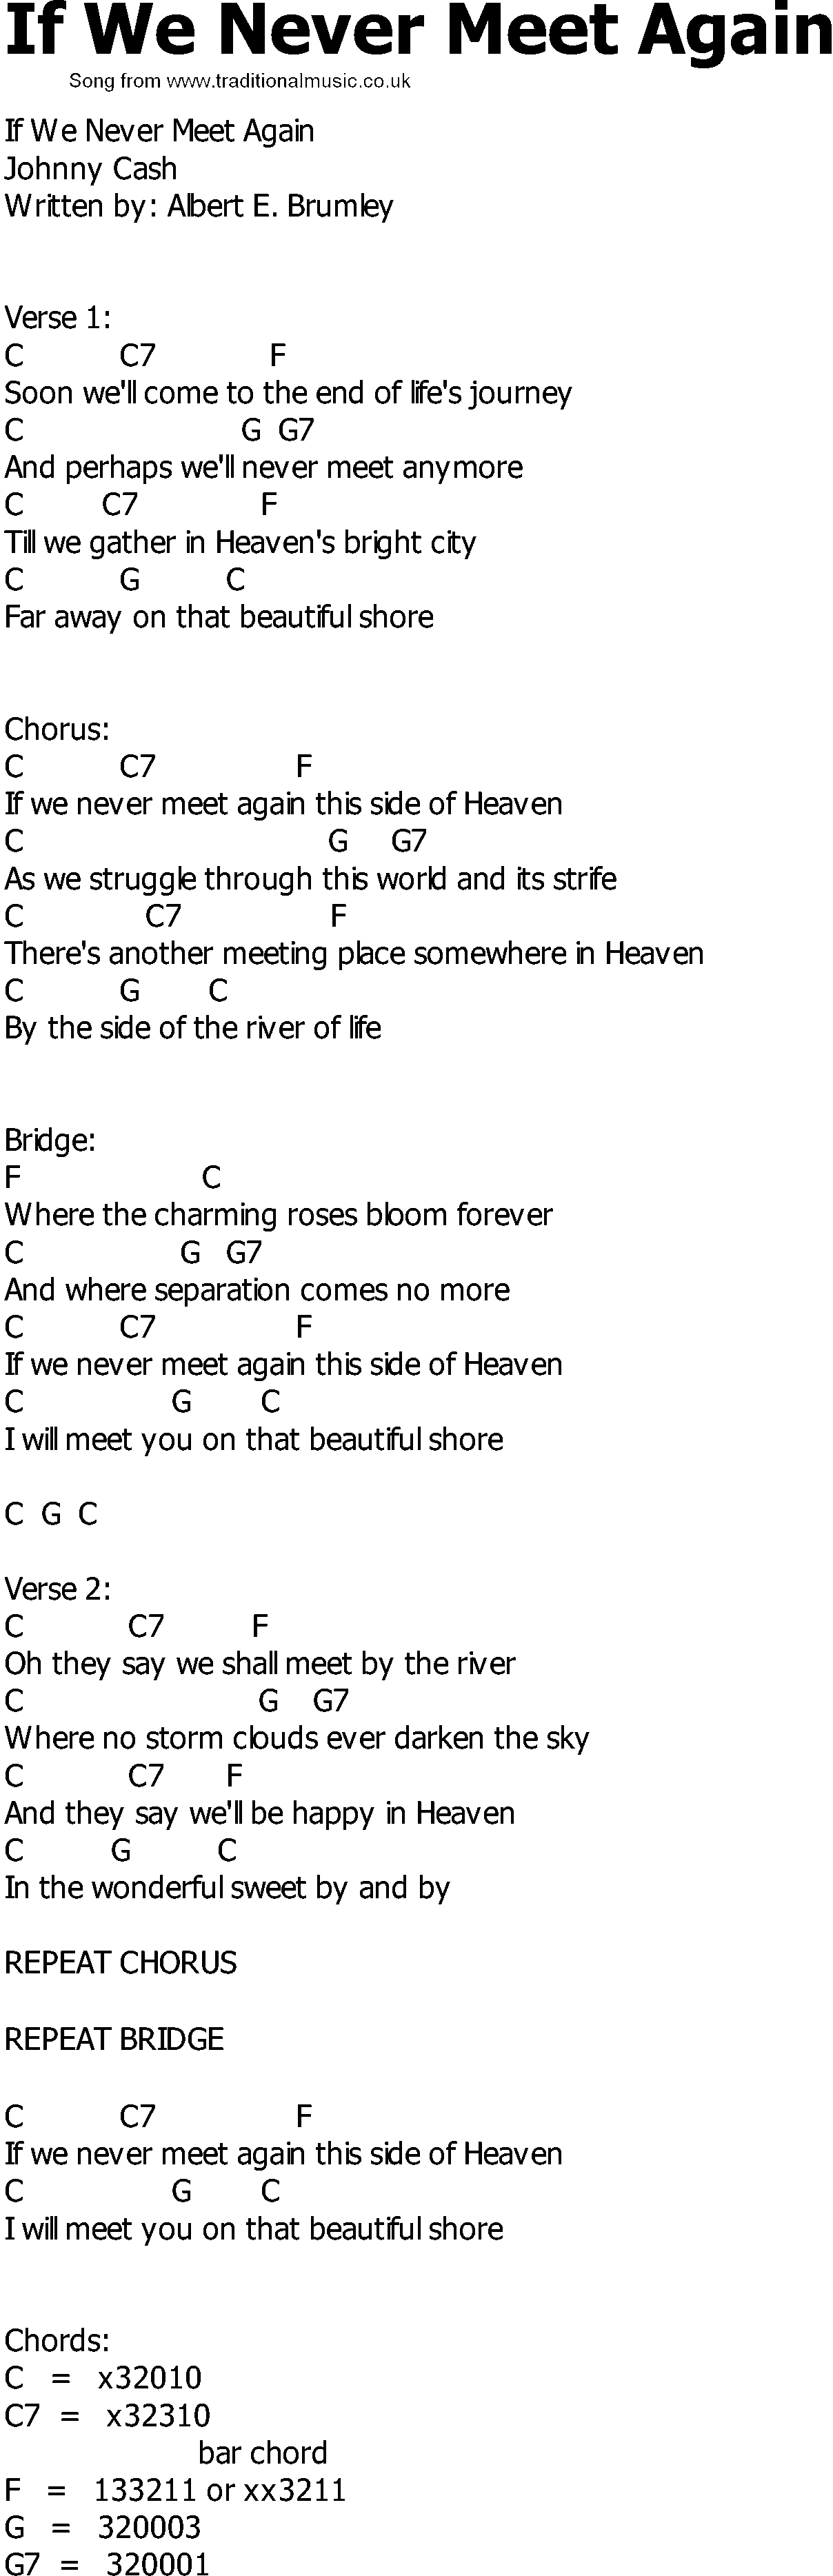 Old Country song lyrics with chords - If We Never Meet Again